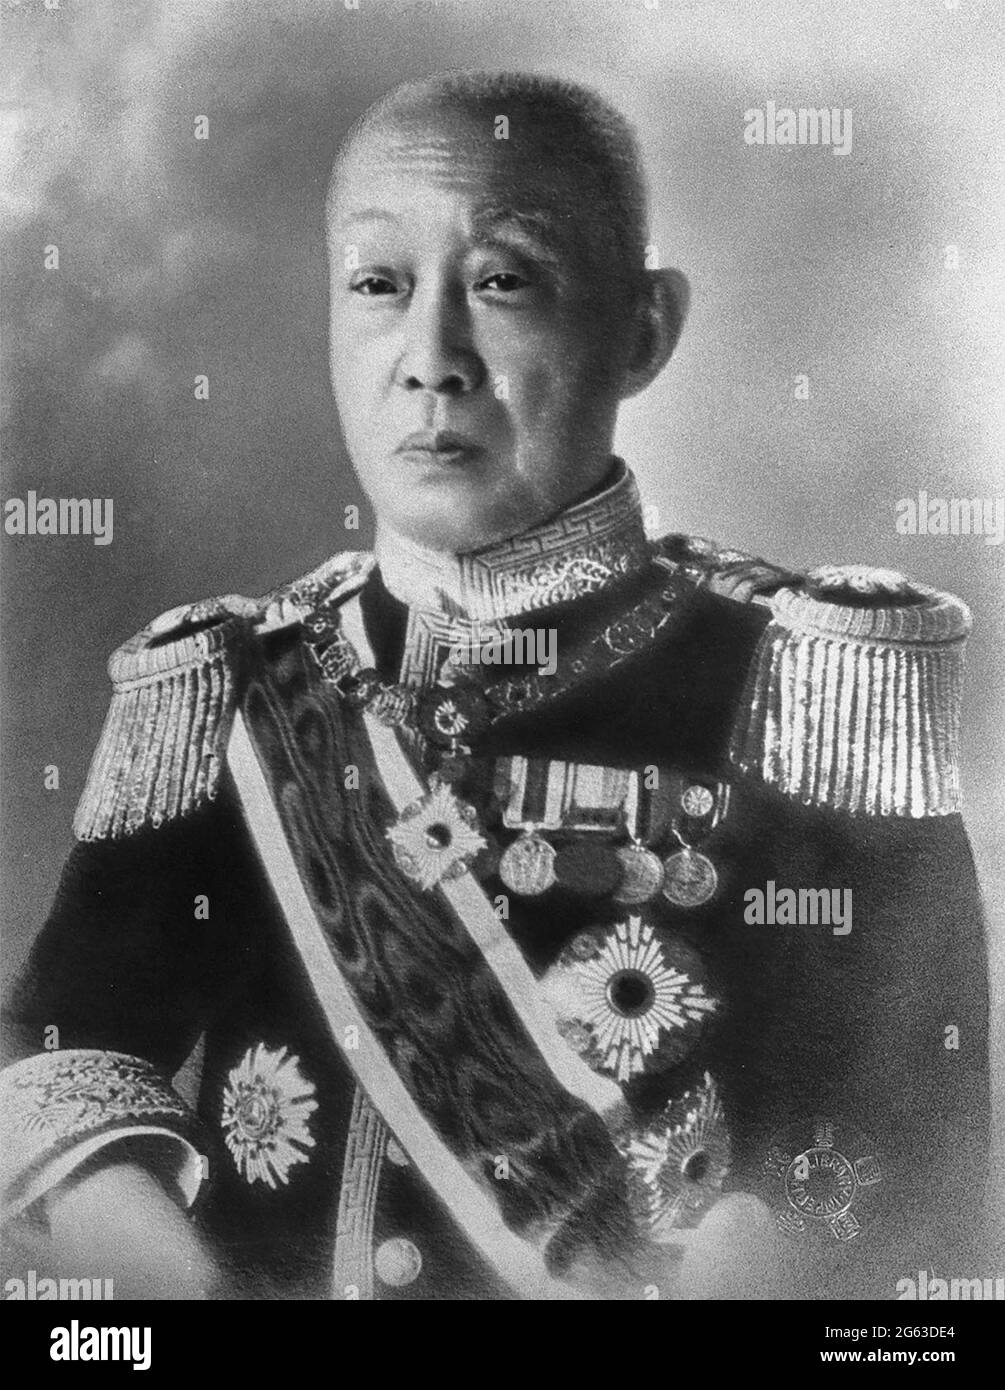 Portrait of Prince Saionji Kinmochi, a Japanese politician, statesman and twice Prime Minister of Japan. He was elevated from marquis to prince in 1920. As the last surviving member of Japan's genrō, he was the most influential voice in Japanese politics from the mid-1920s to the early 1930s. Stock Photo